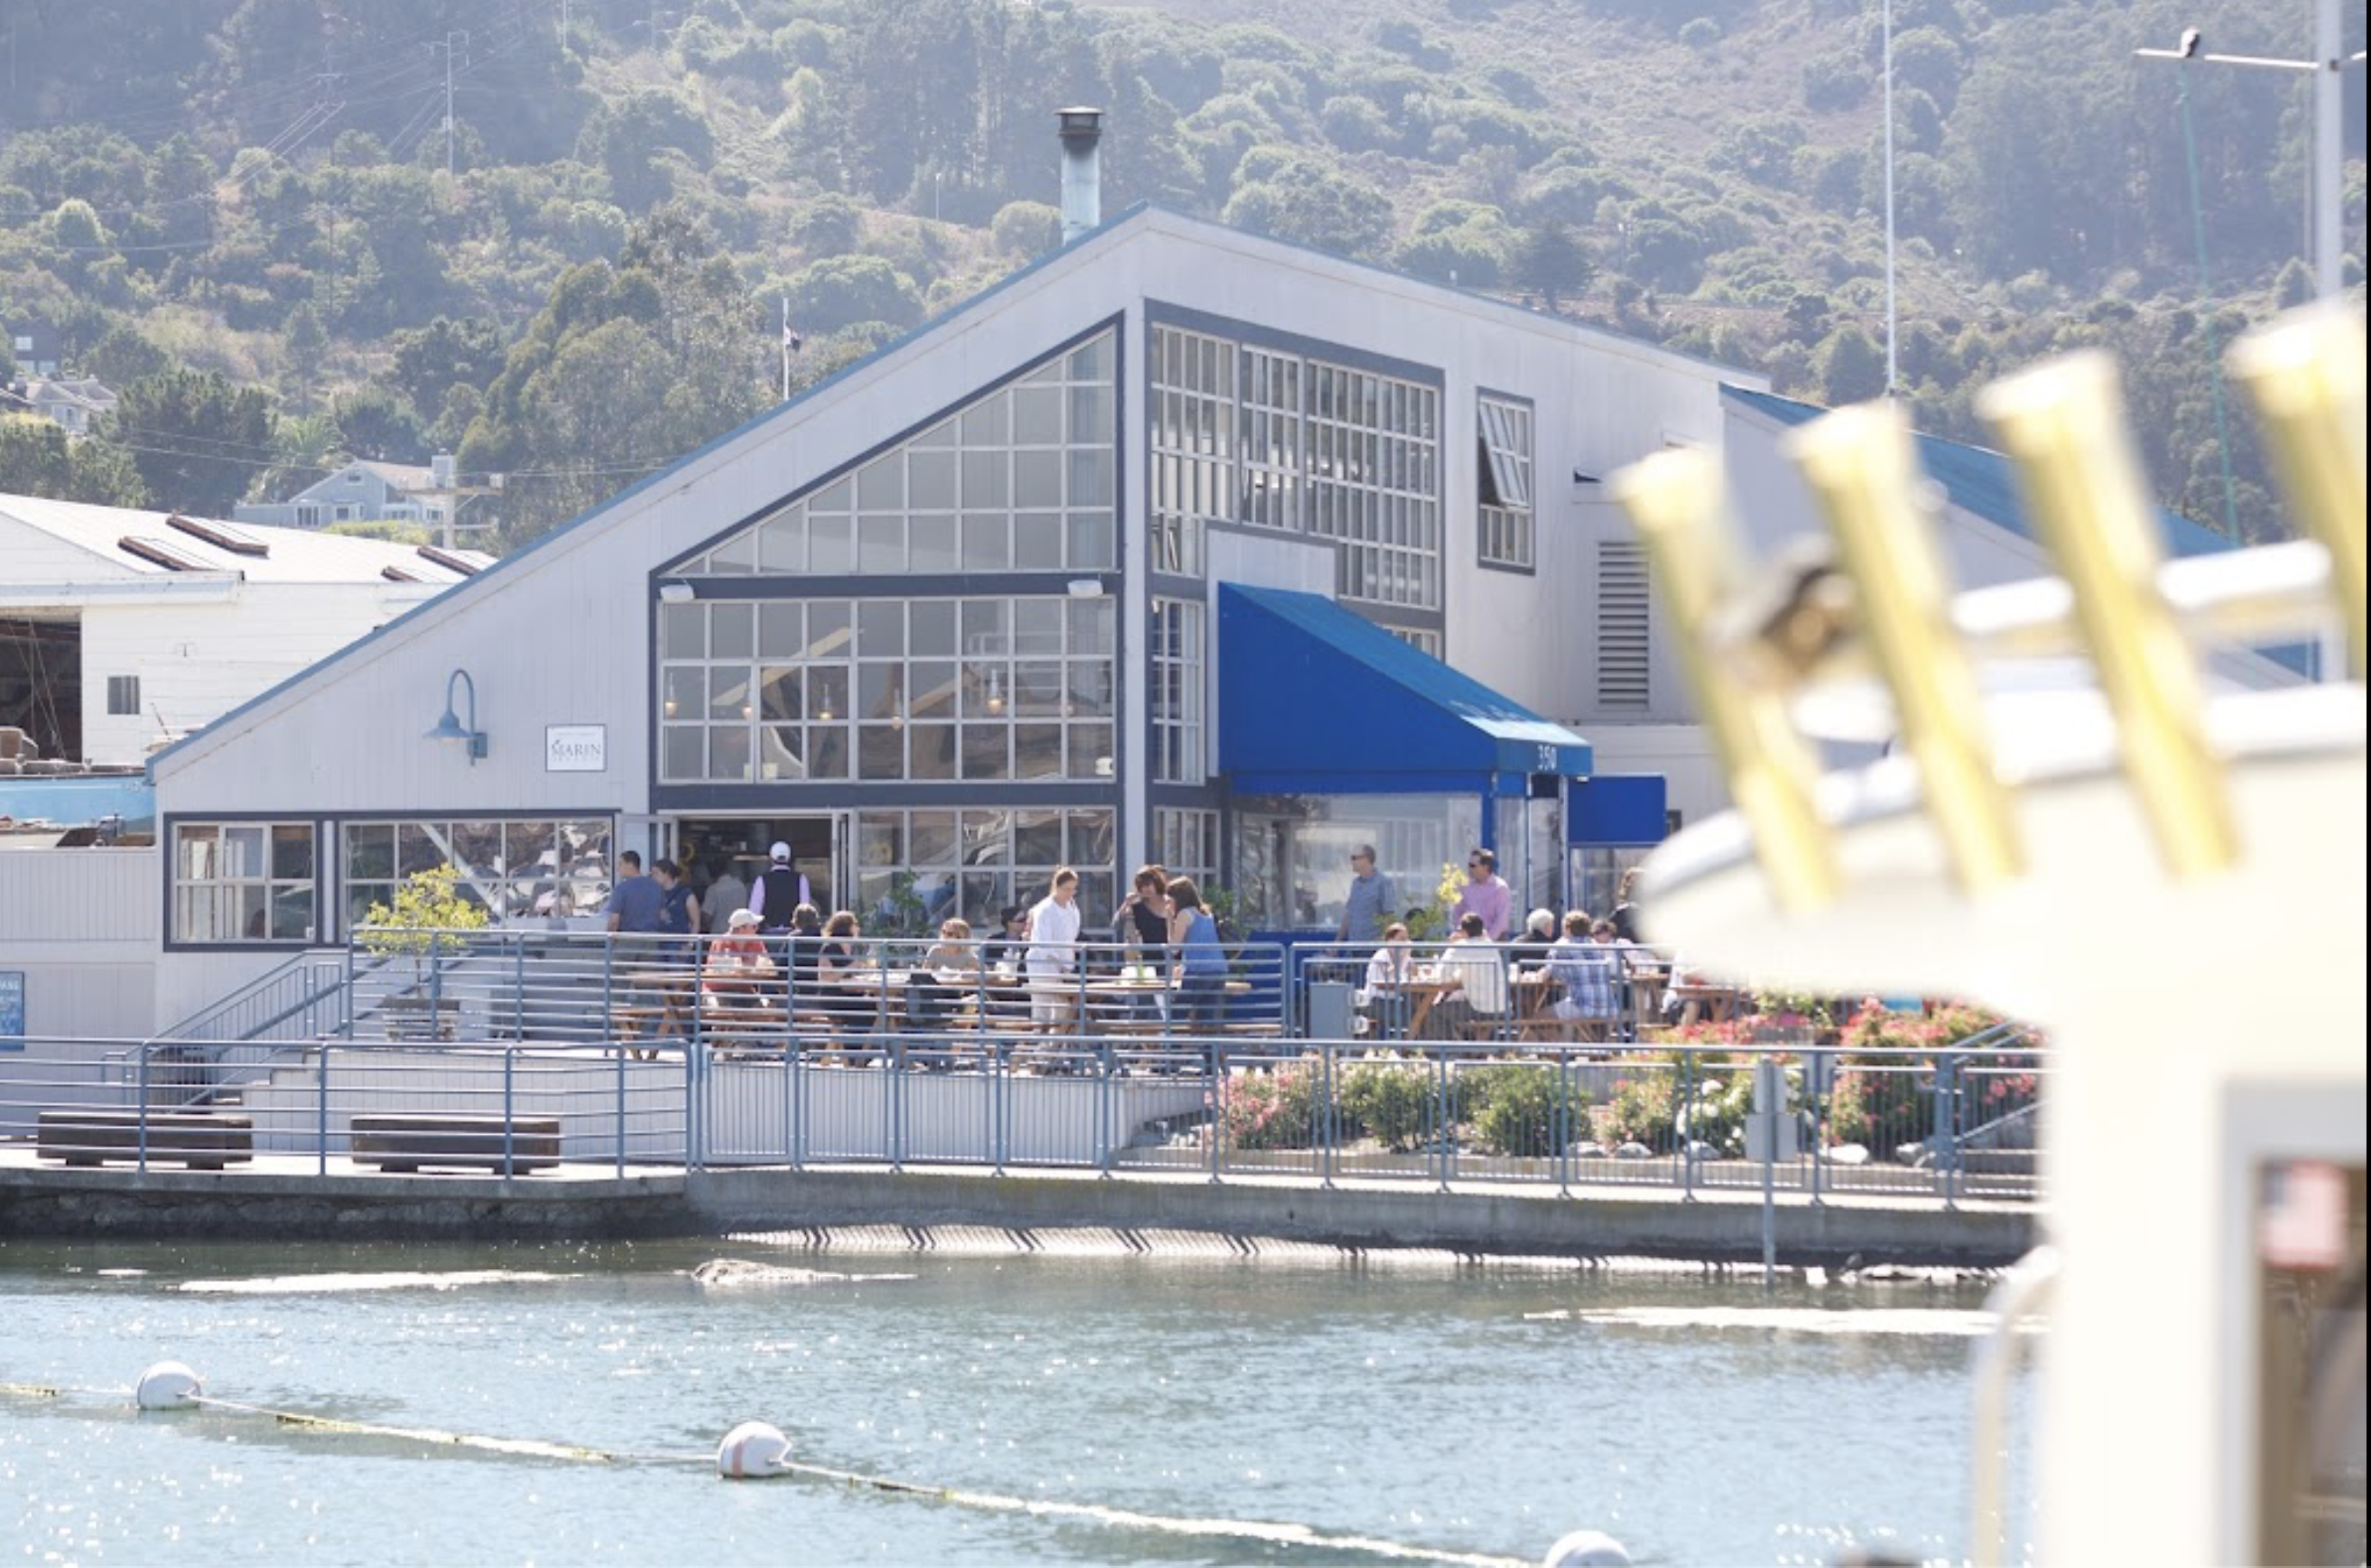 Fish. Is A Waterfront Seafood Market And Restaurant In Northern California